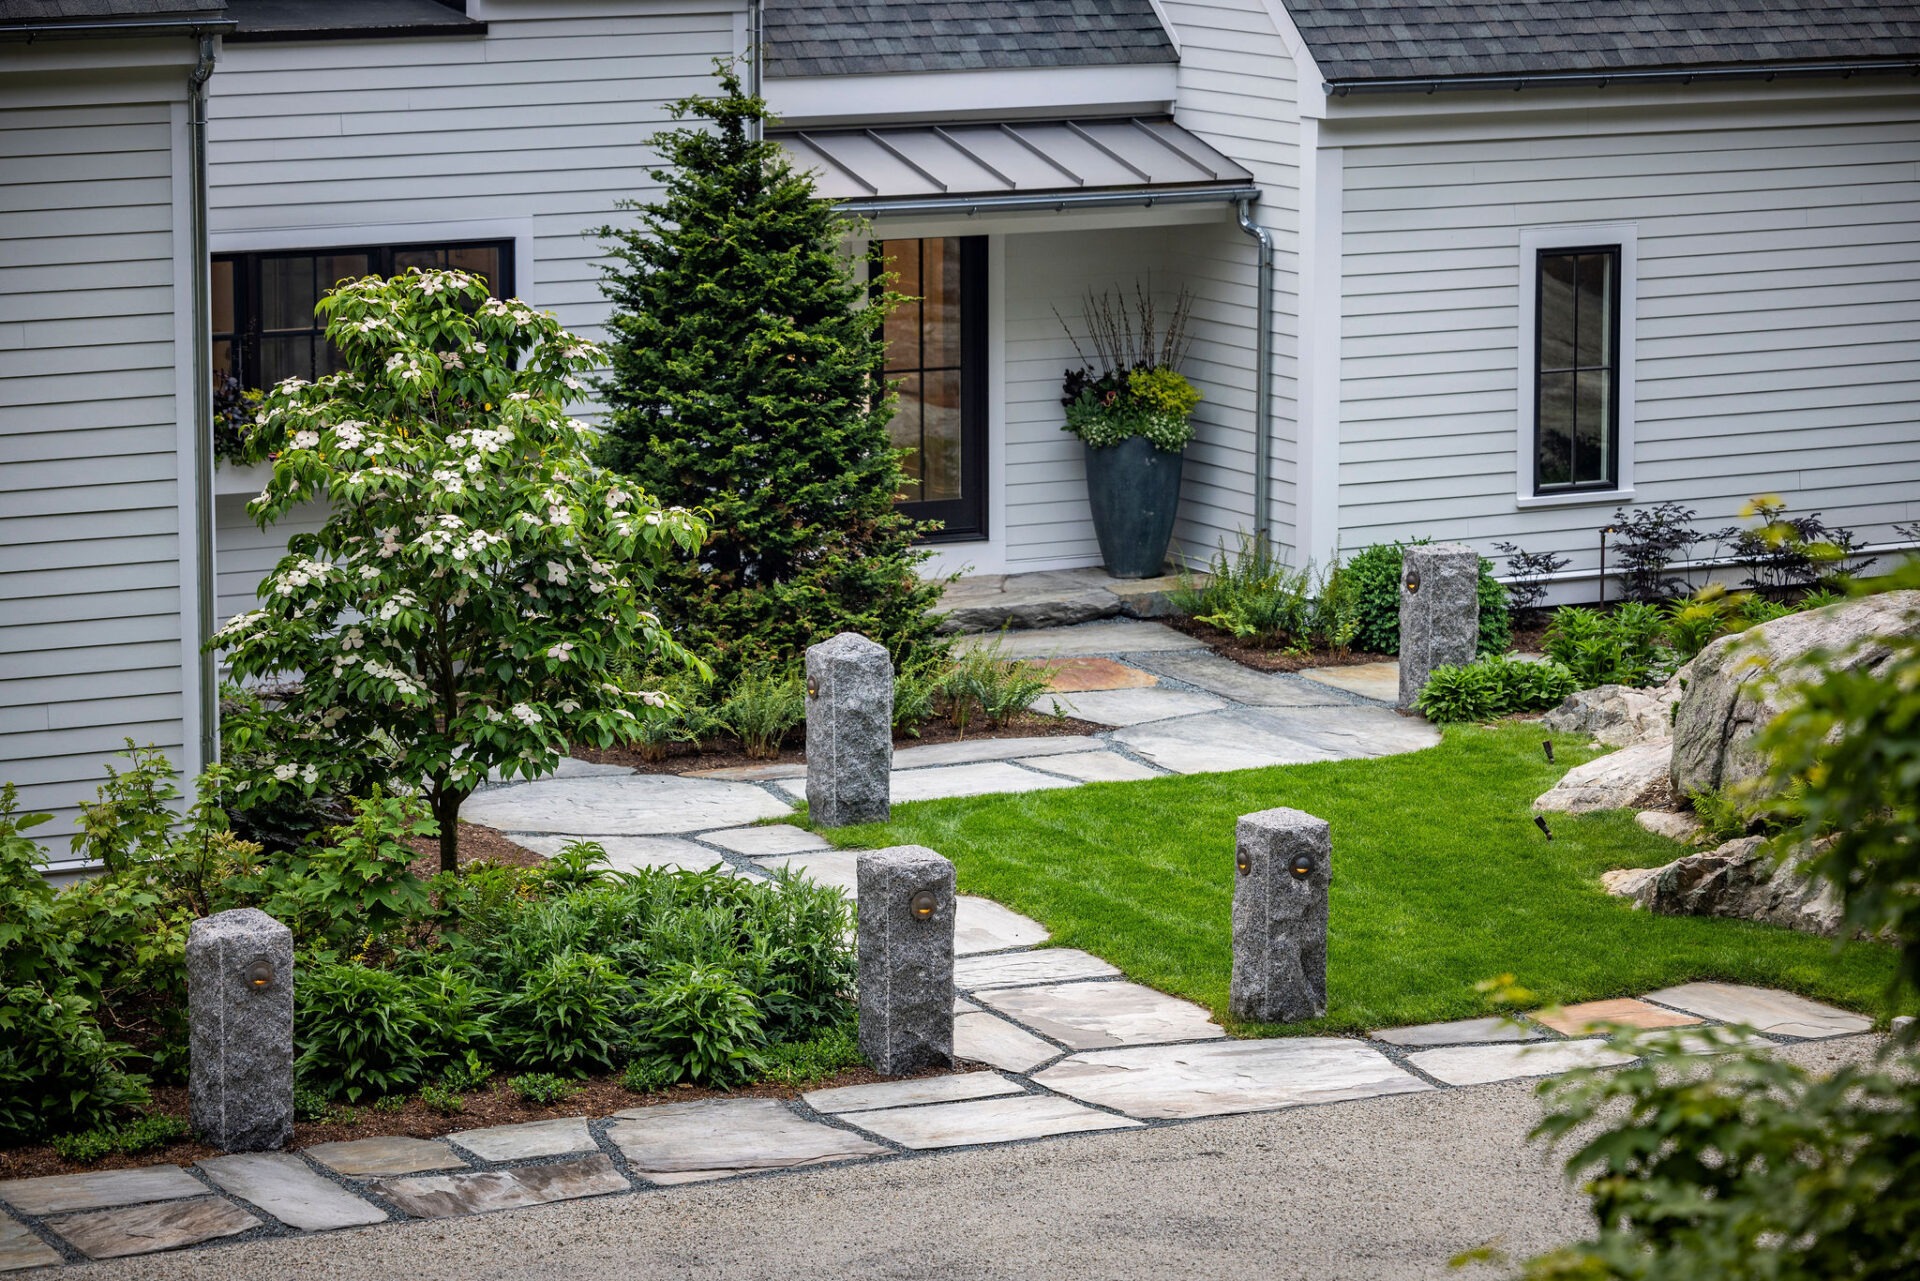 A well-manicured garden with a stone path, green lawn, and decorative granite posts leading to a gray house with white trim under a cloudy sky.